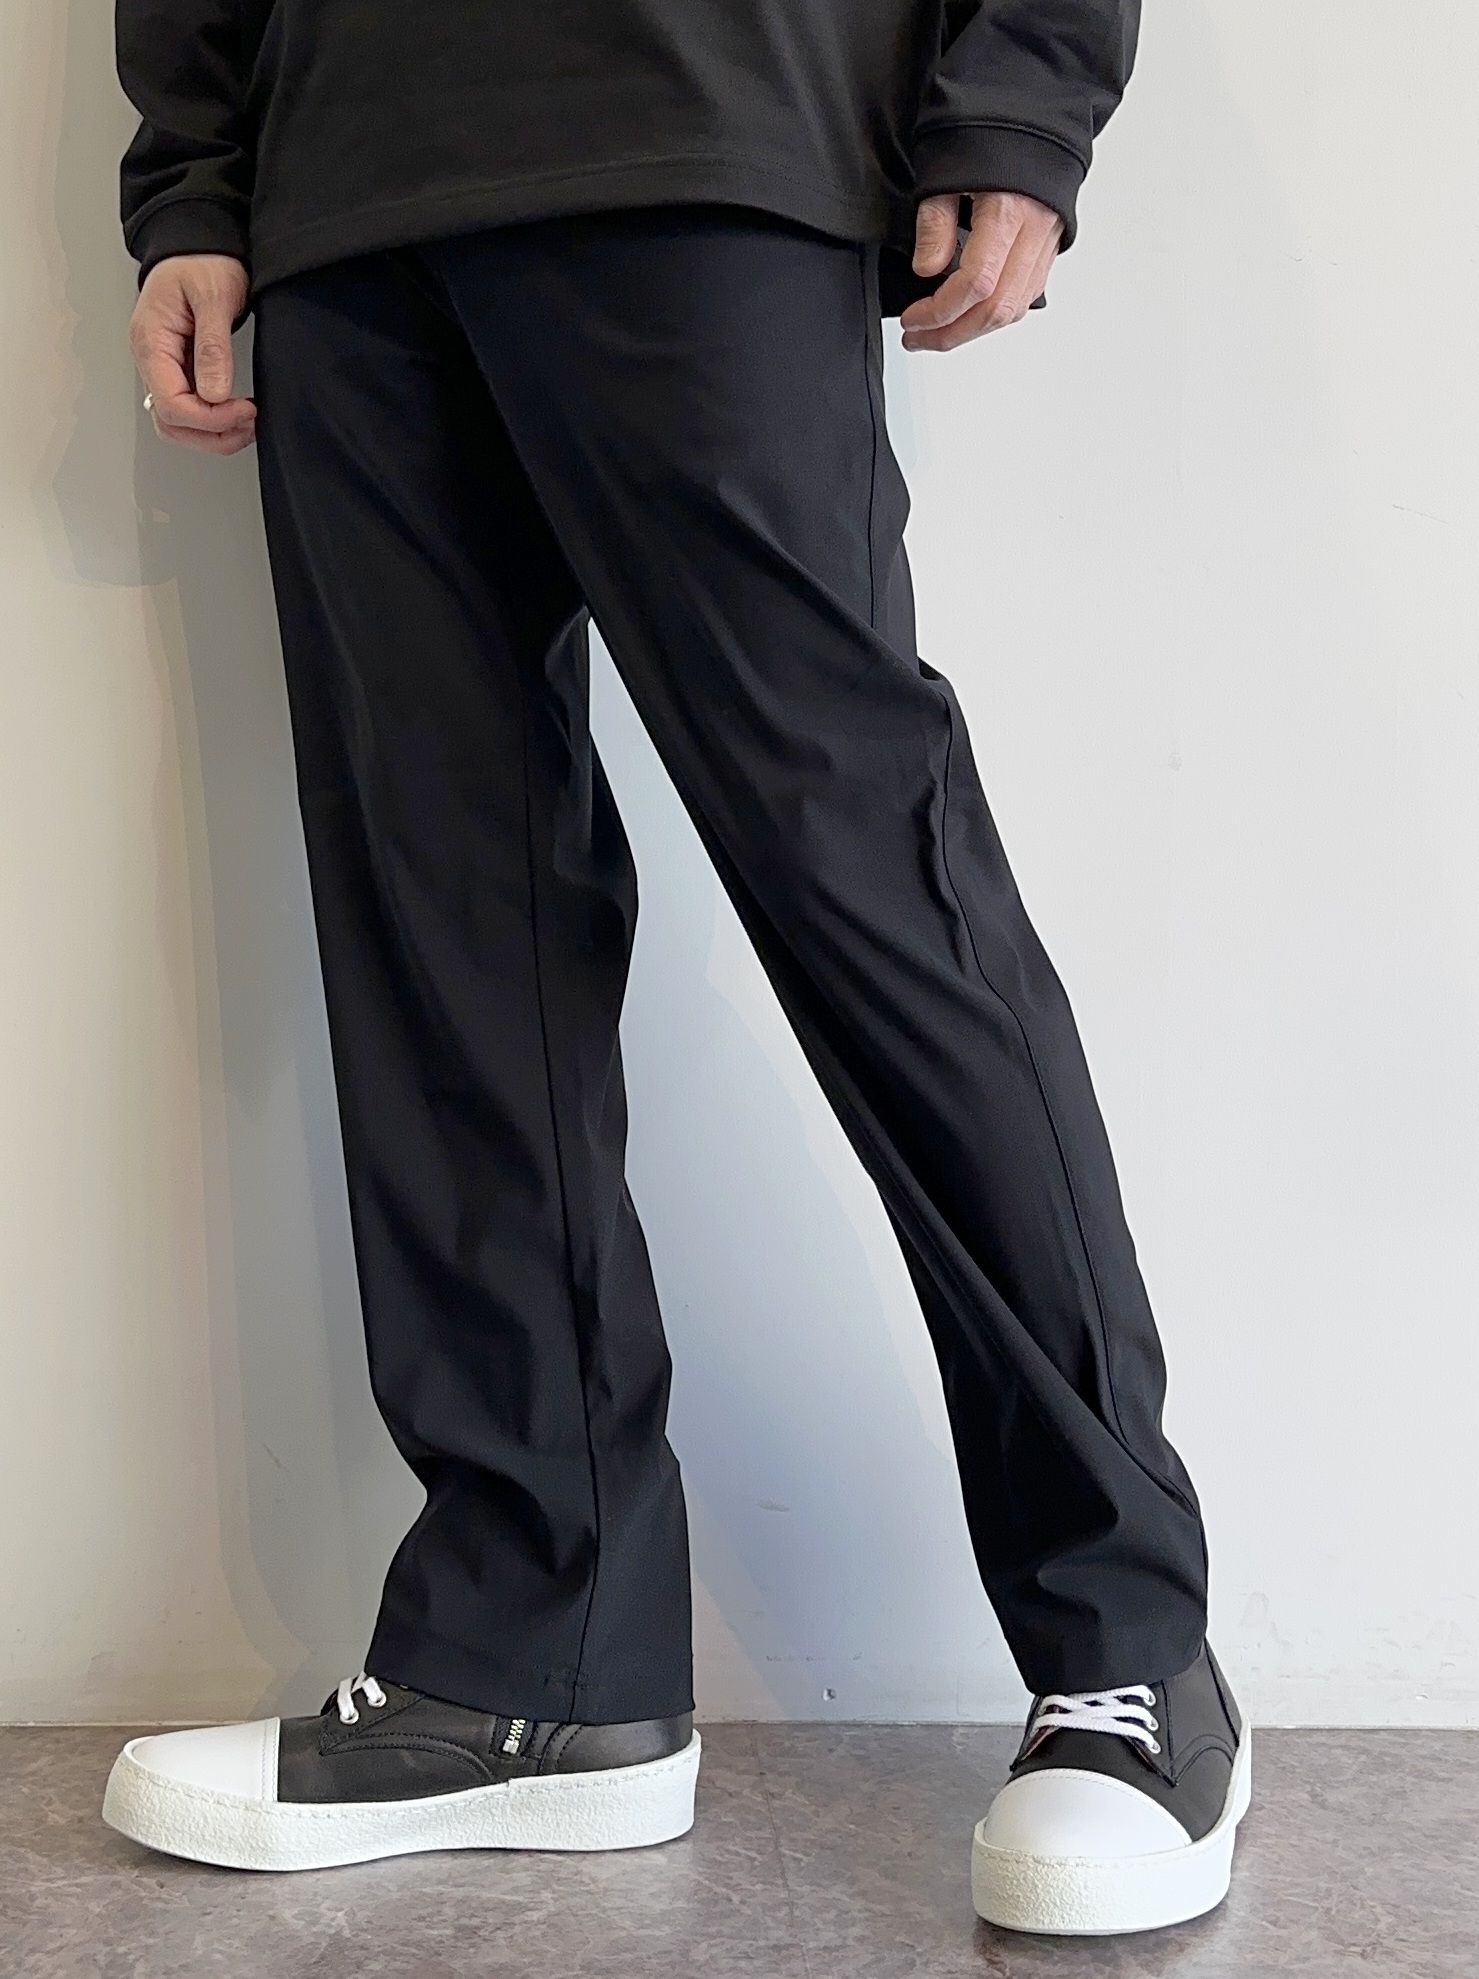 RESOUND CLOTHING - CHRIS EASY WIDE PANTS / RC31-ST-016W / ナイロン 